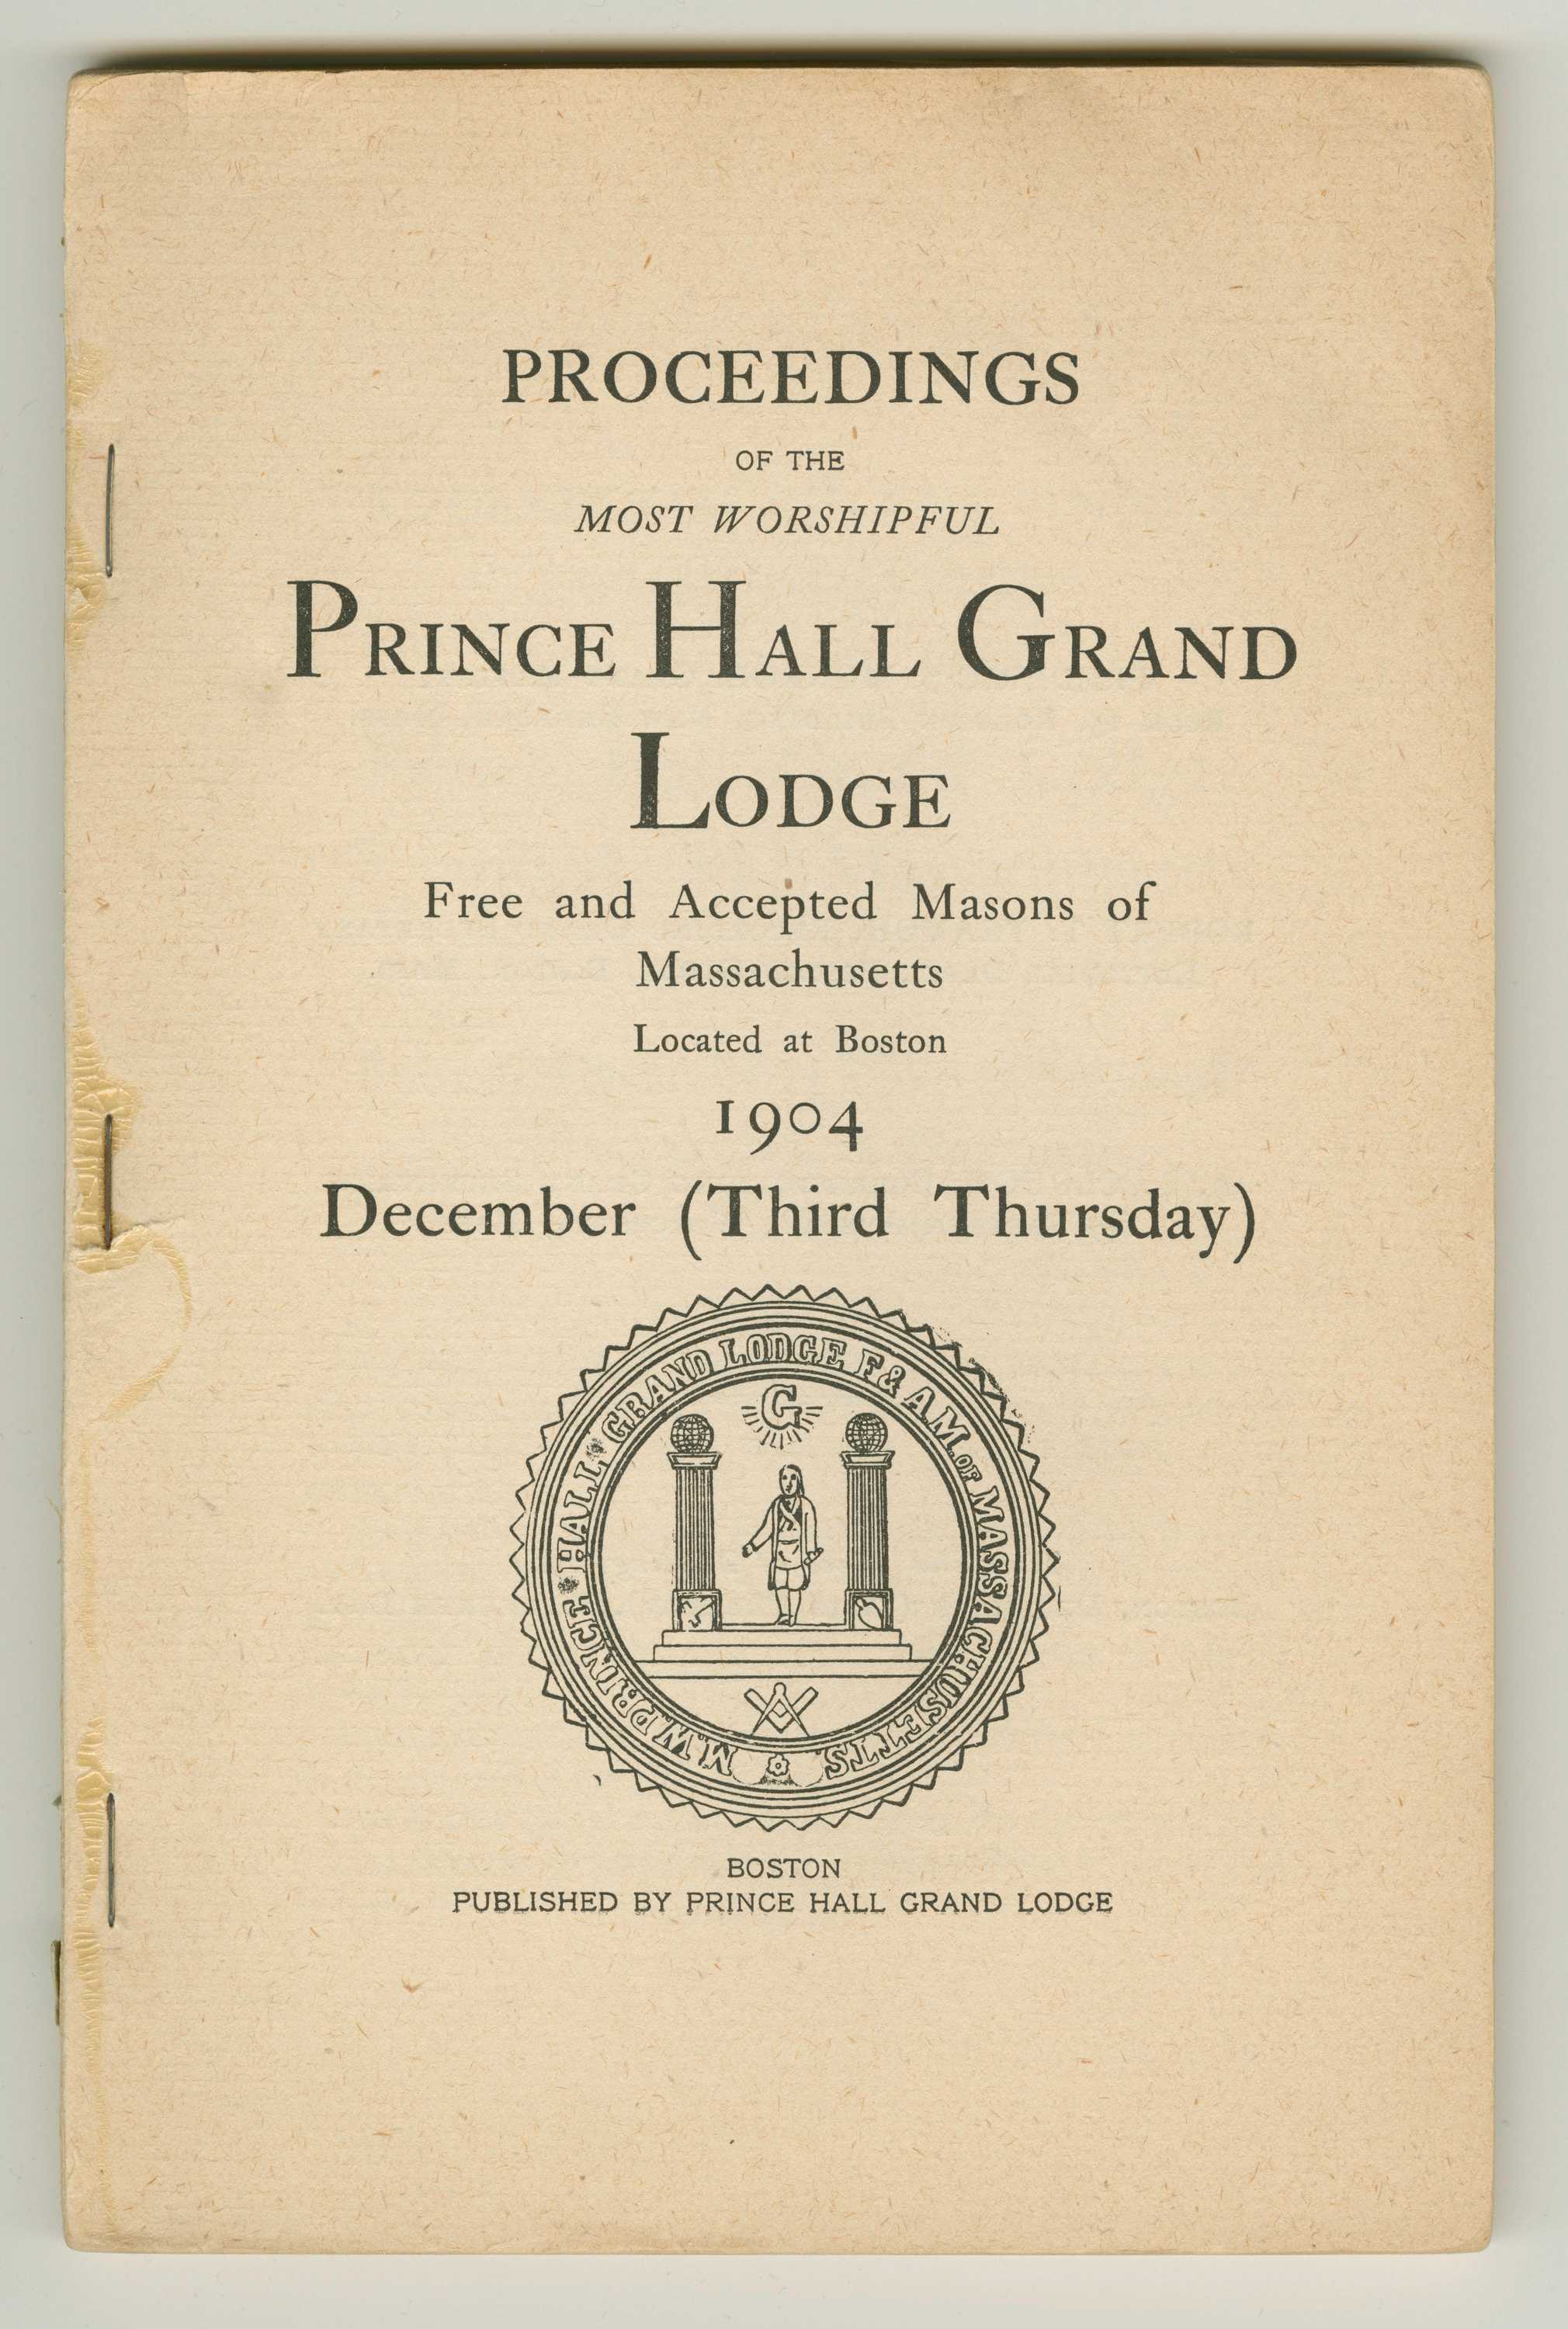 A booklet detailing the proceedings of the Prince Hall Grand Lodge of Massachusetts, 1904.